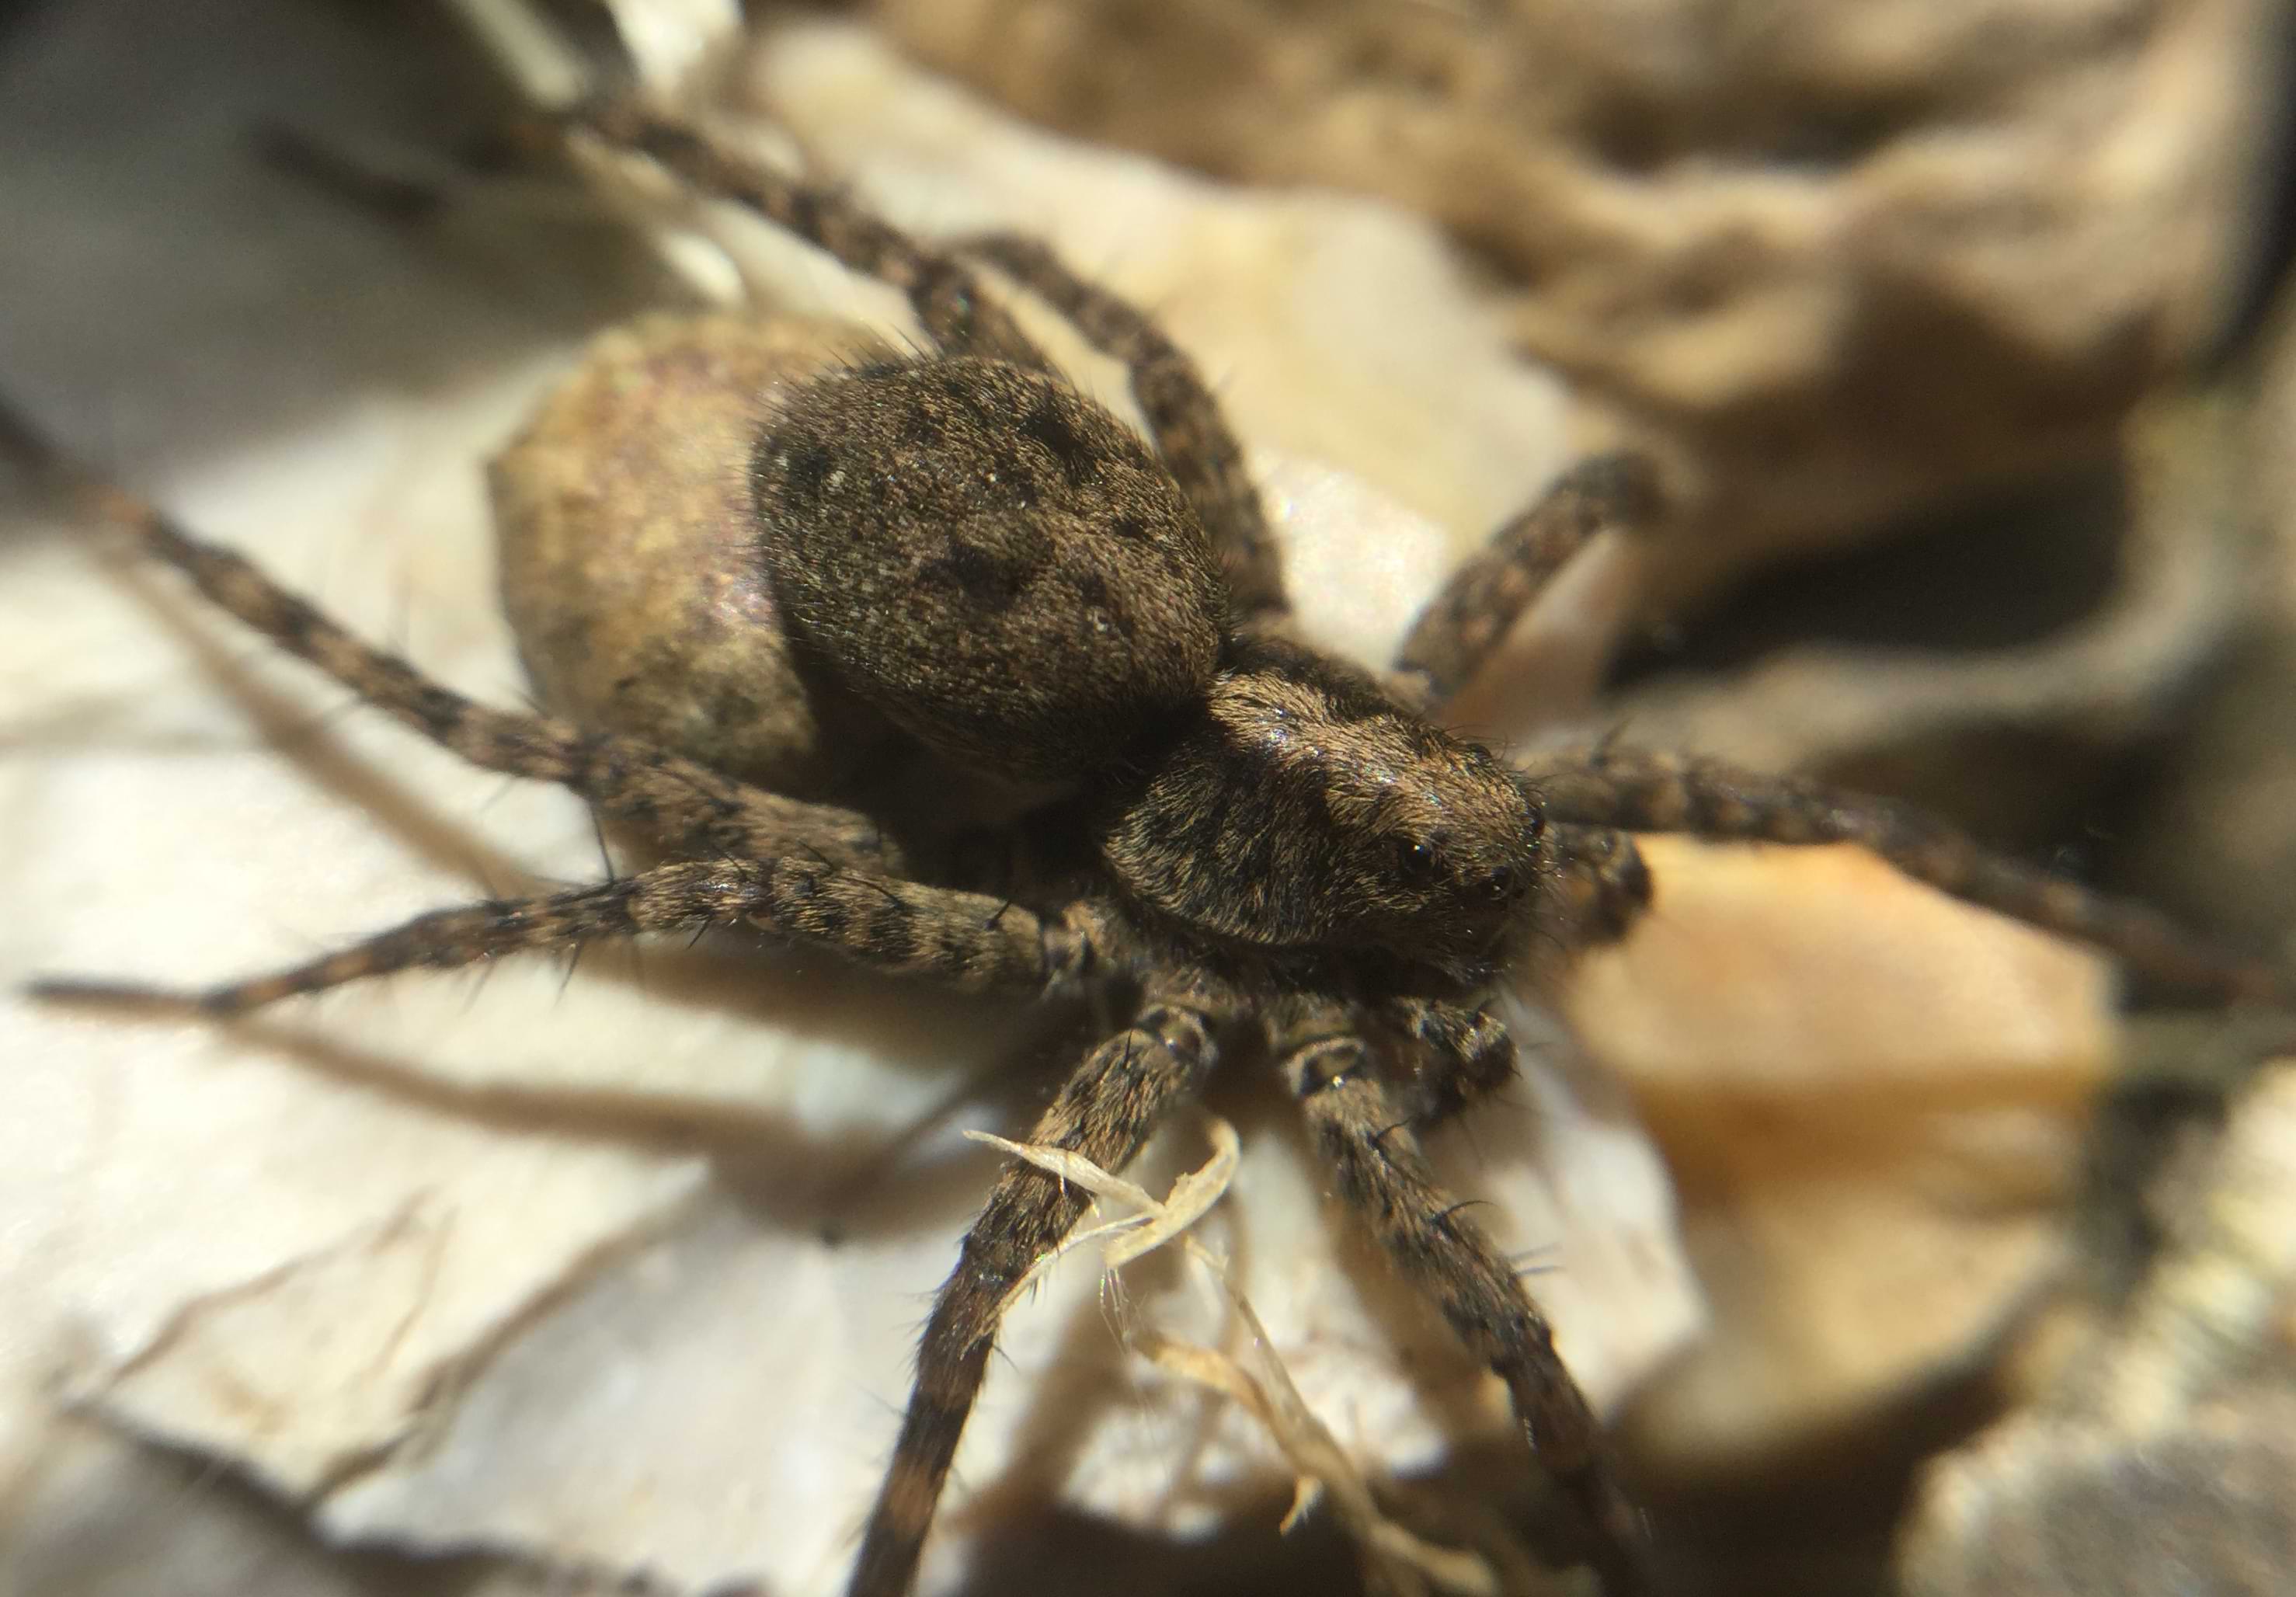 A side view of the spider sitting on a rock.